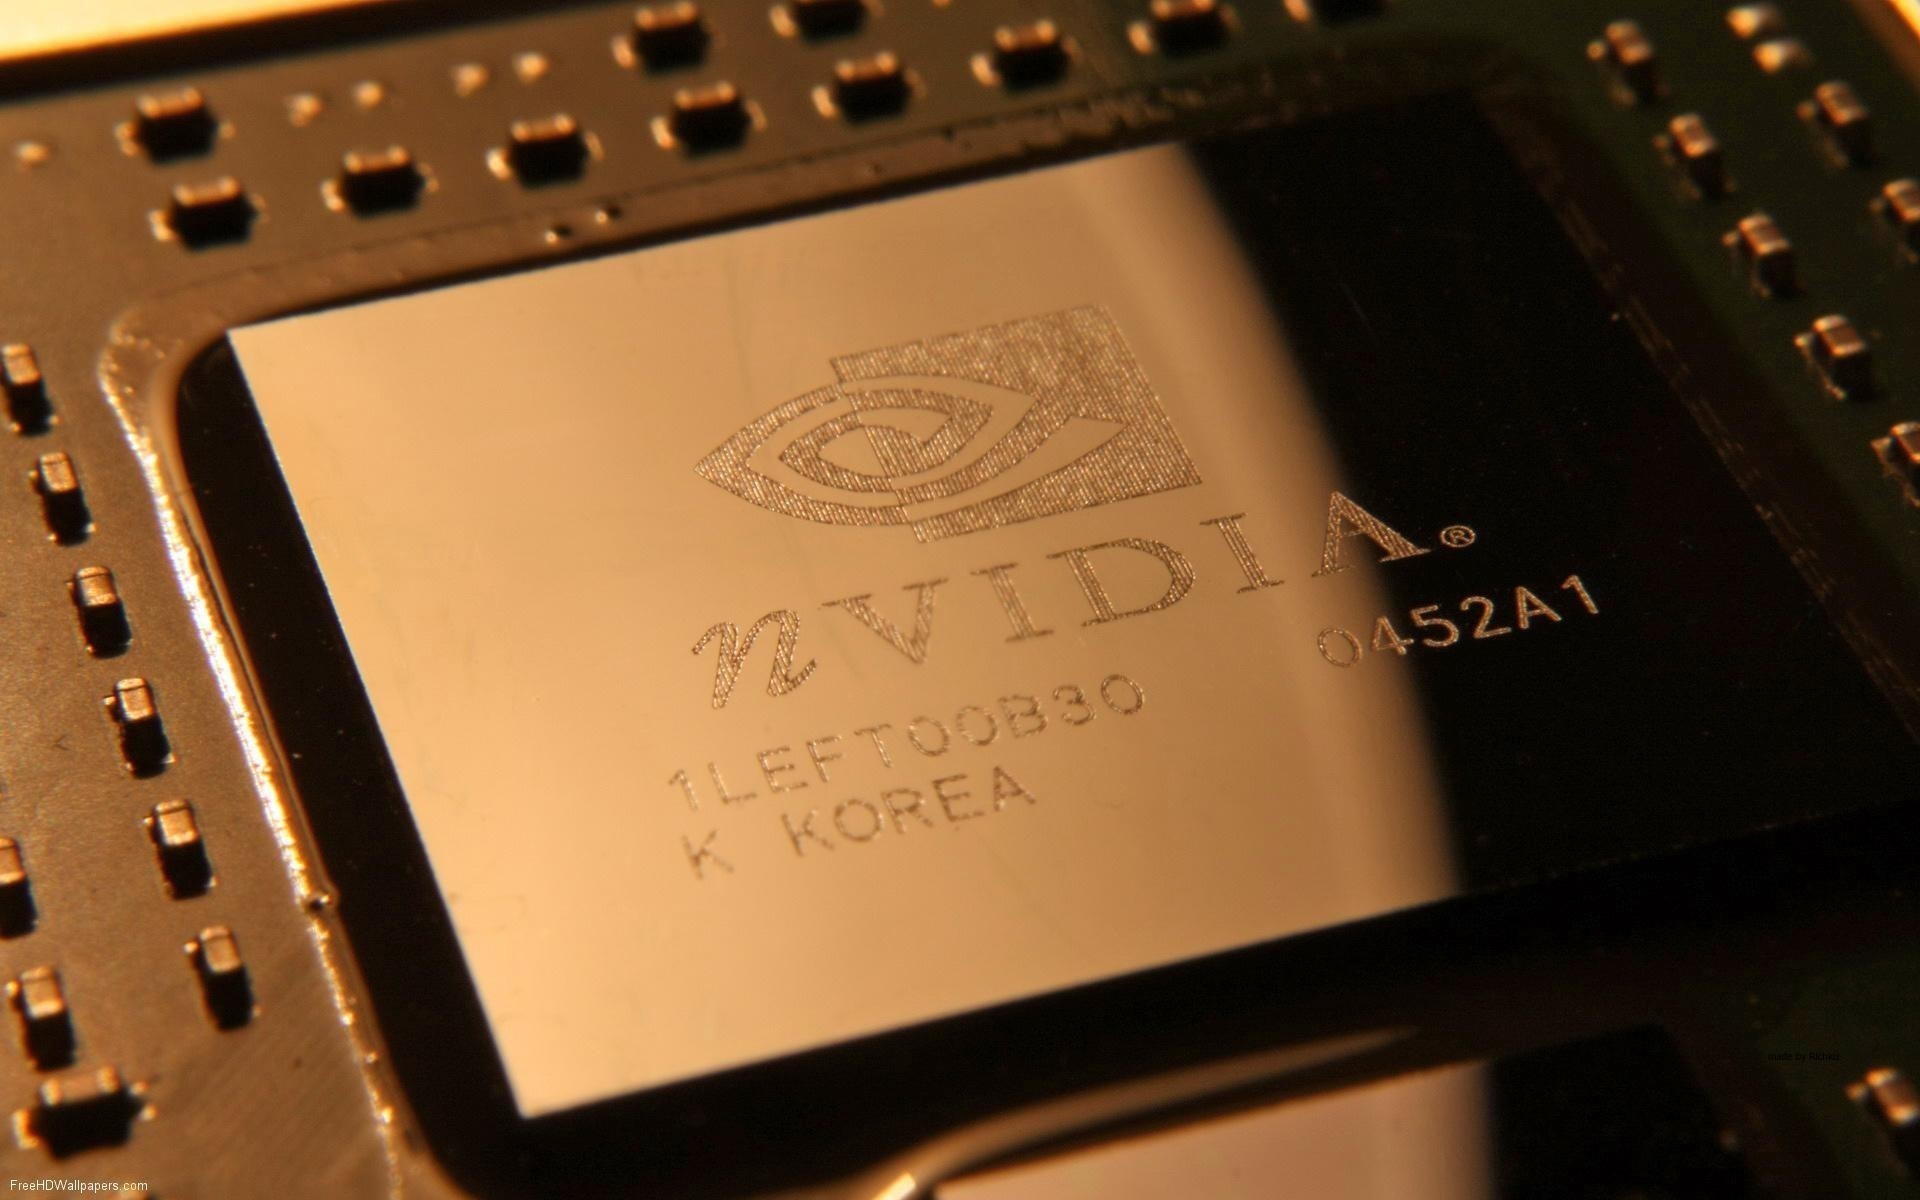 nVIdia Chipset for 1920 x 1200 widescreen resolution